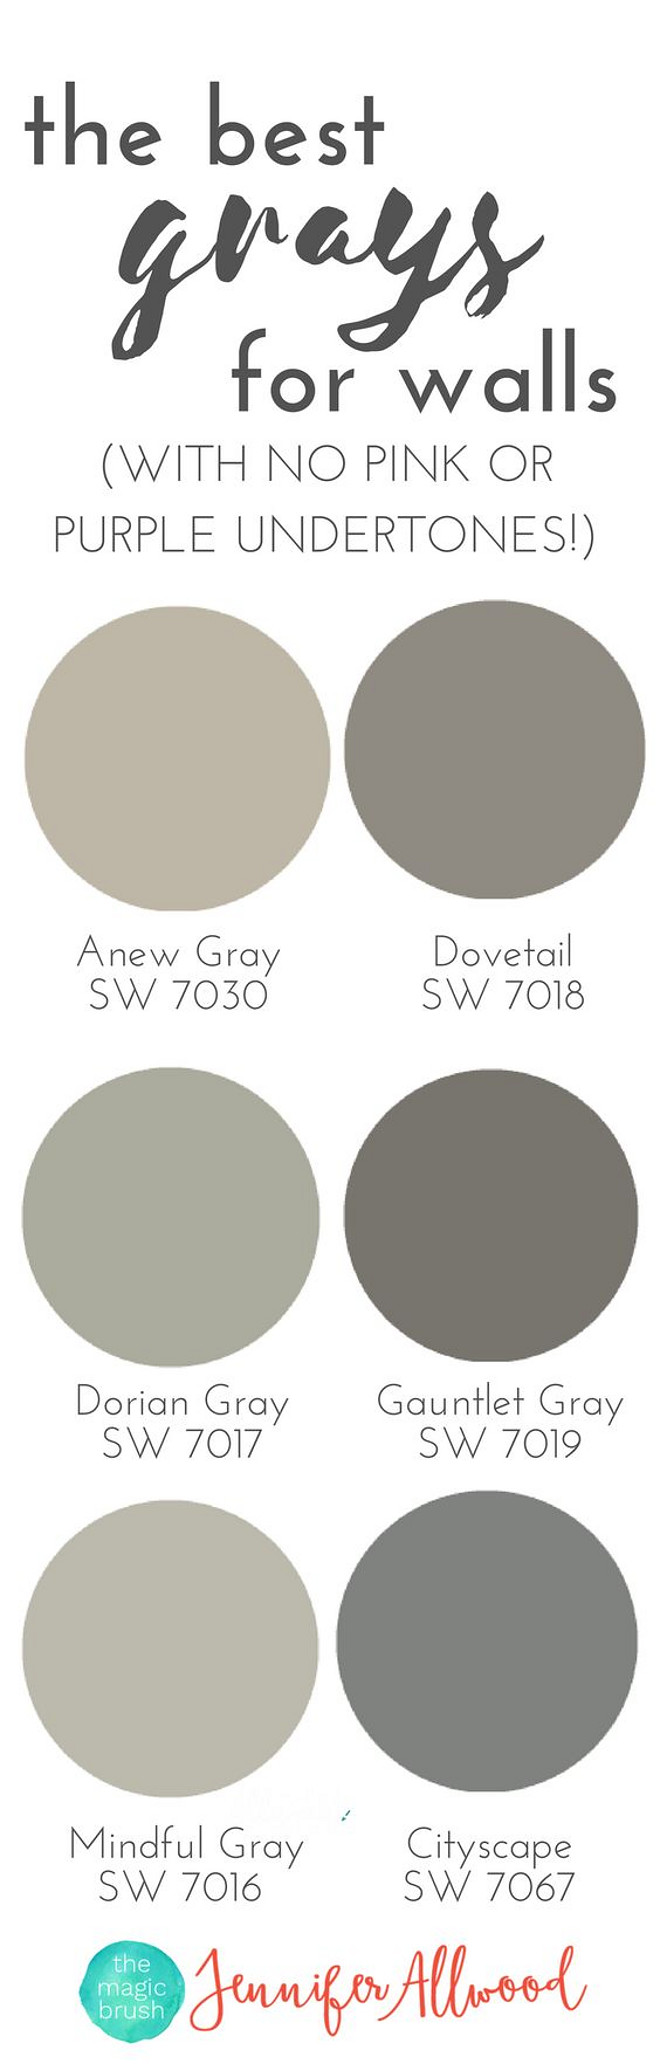 Best Gray Paint Colors with no pink or purple undertones. Sherwin Williams SW 7030 Anew Gray. Sherwin Williams SW 7018 Dovetail. Sherwin Williams SW 7017 Dorian Gray. Sherwin Williams SW 7019 Gauntlet Gray. Sherwin Williams SW 7016 Mindful Gray. Sherwin Williams SW 7067 Cityscape #SherwinWilliamsSW700AnewGray #SherwinWilliamsSW7018Dovetail #SherwinWilliamsSW7017DorianGray #SherwinWilliamsSW7019GauntletGray #SherwinWilliamsSW7016MindfulGray #SherwinWilliamsSW7067Cityscape #BestGrayPaintColors #undertones